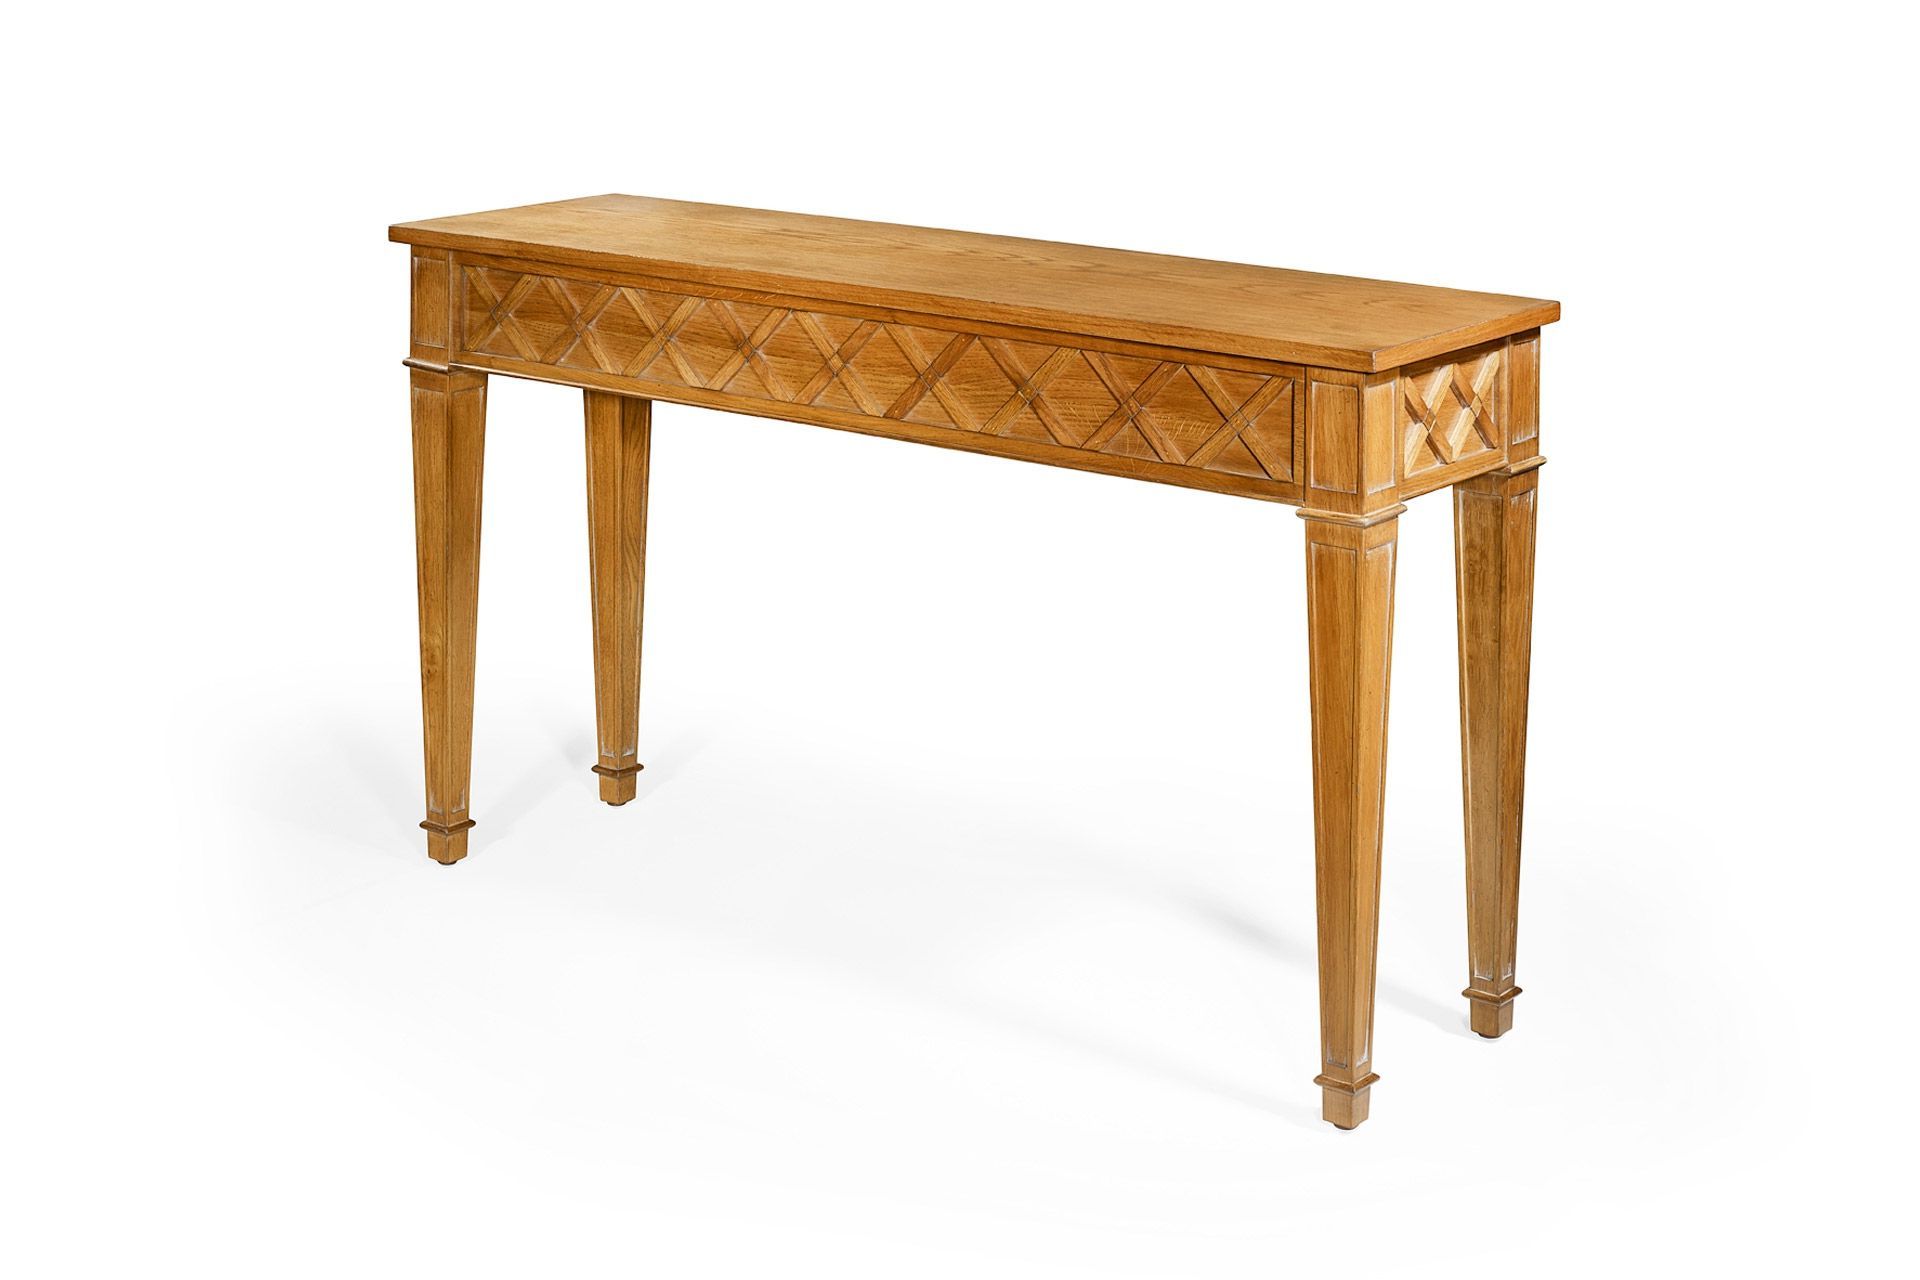 Hand Carved White Wash Console Tables Pertaining To Famous The Josette Console Table Is Shown In Cherry Wood With A Lamartine (View 16 of 20)